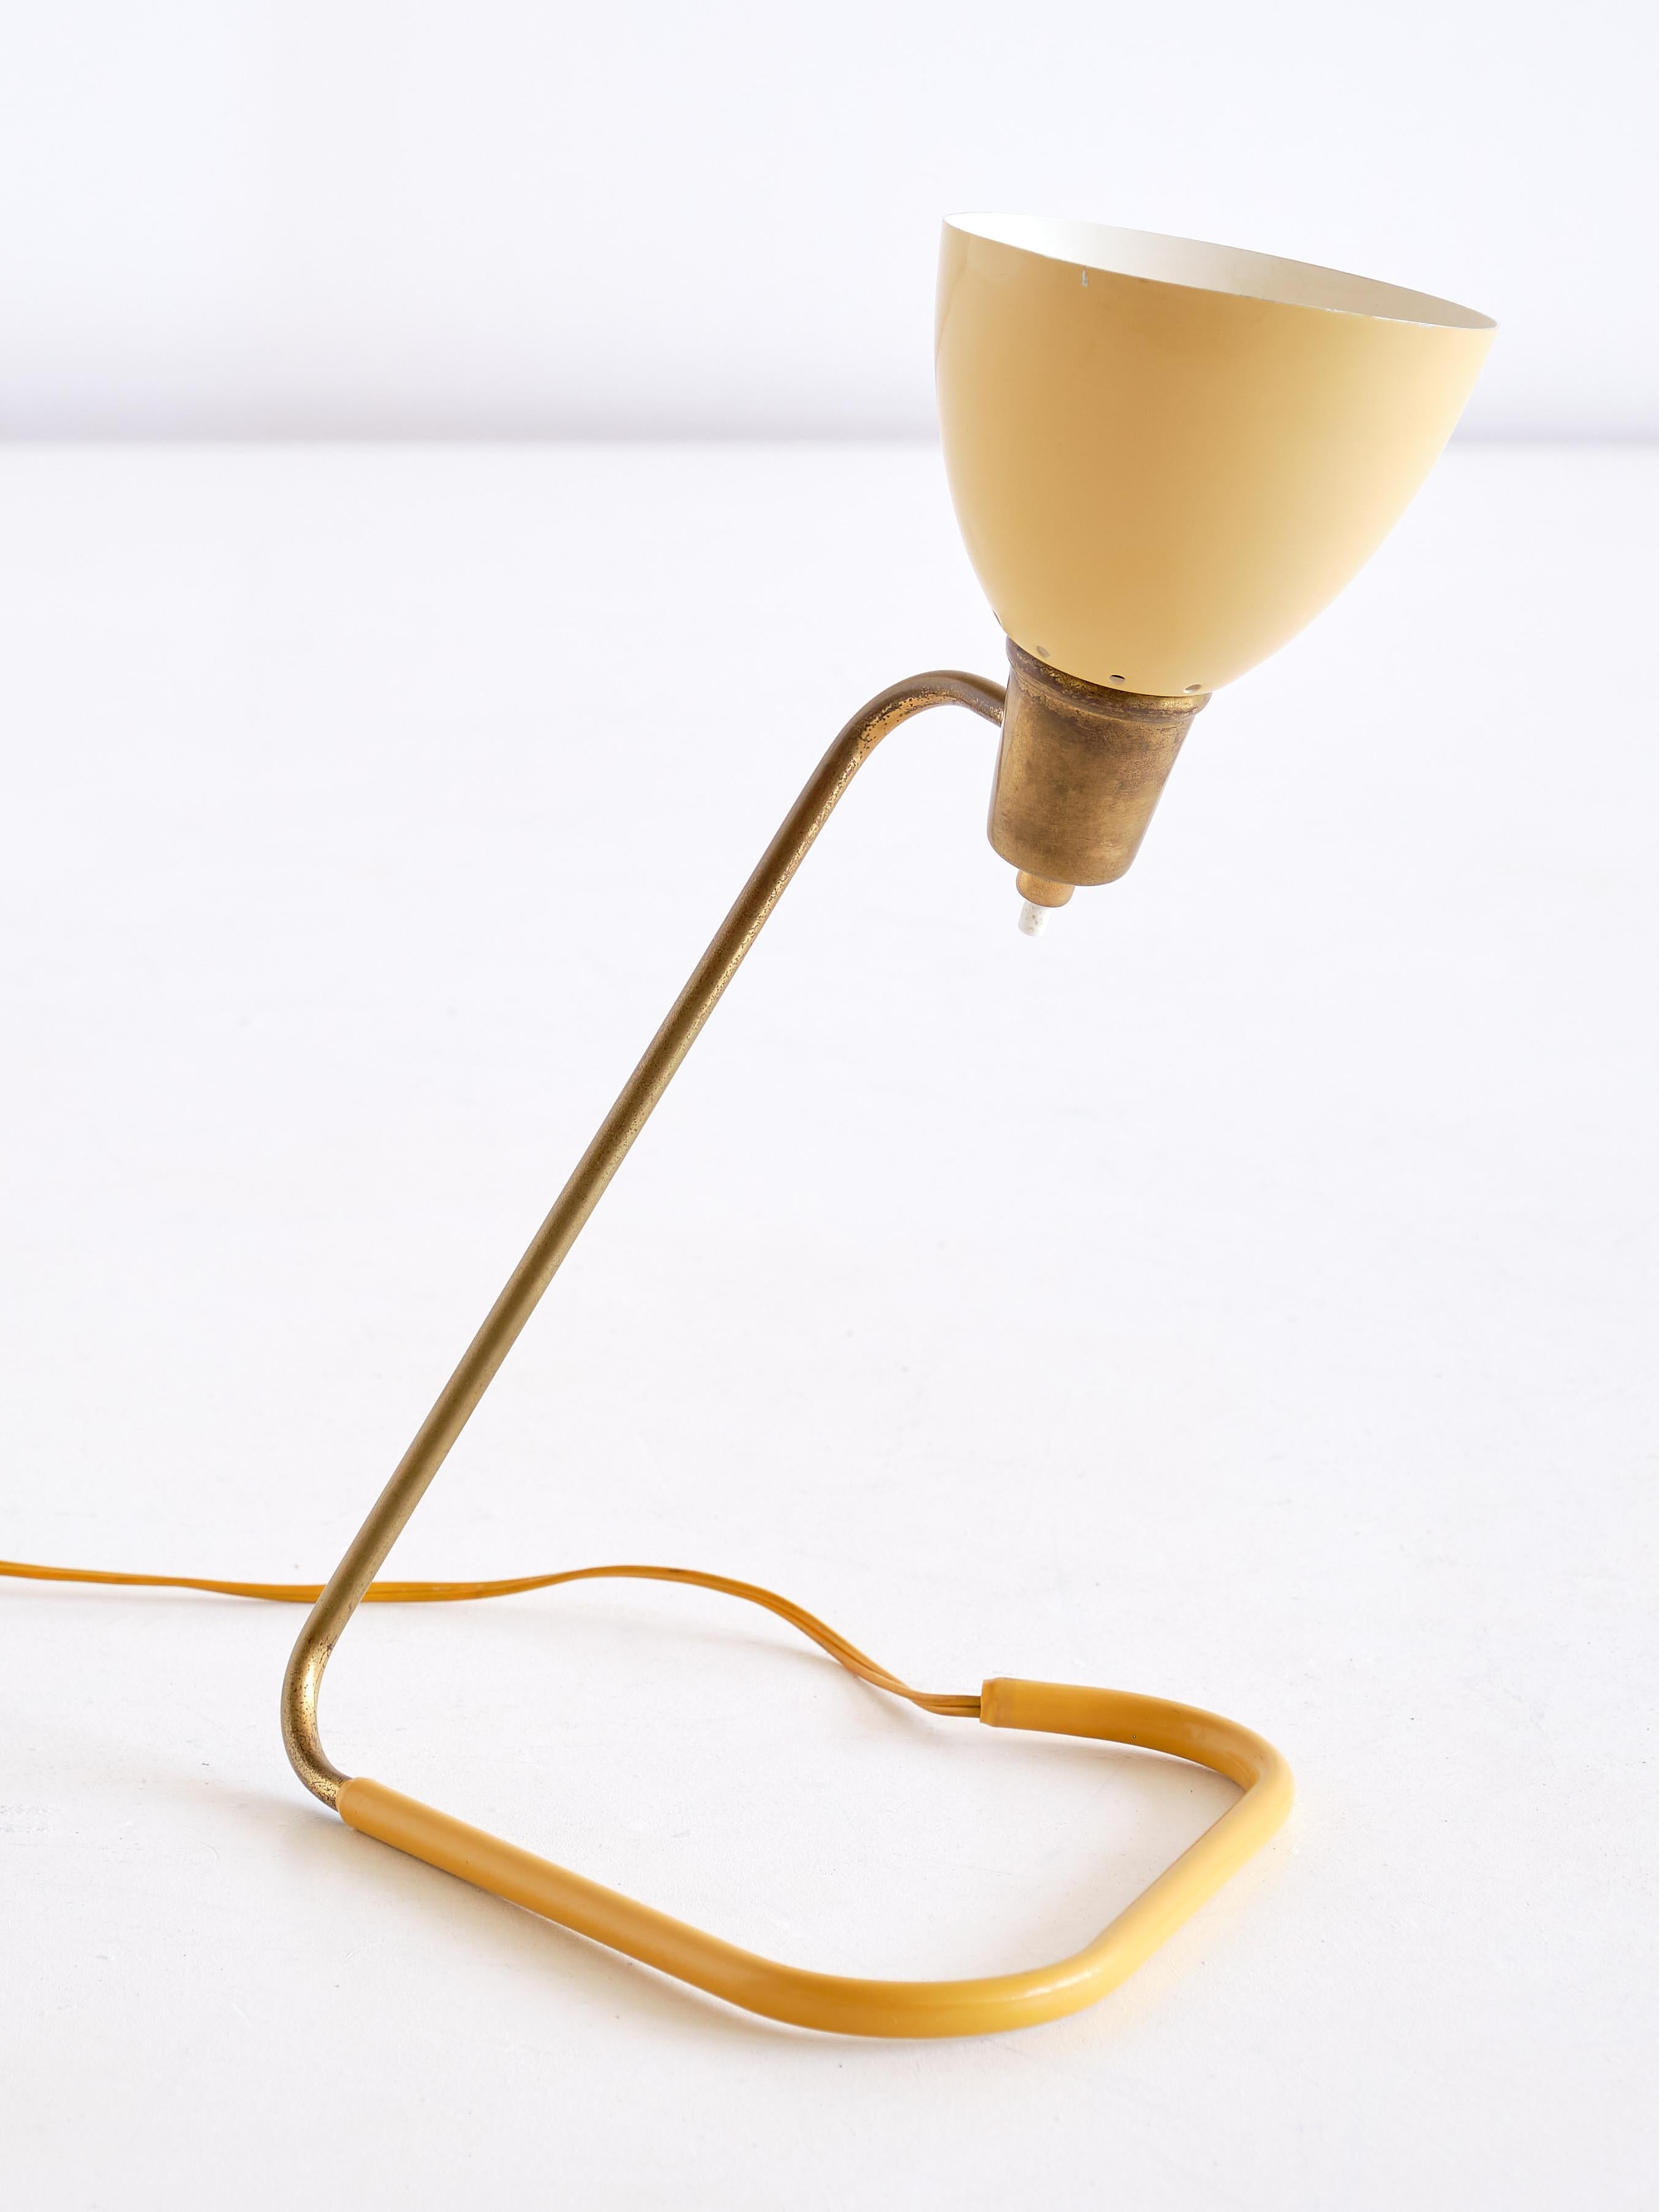 French Robert Caillat Table Lamp with Yellow Adjustable Shade, France, 1950s For Sale